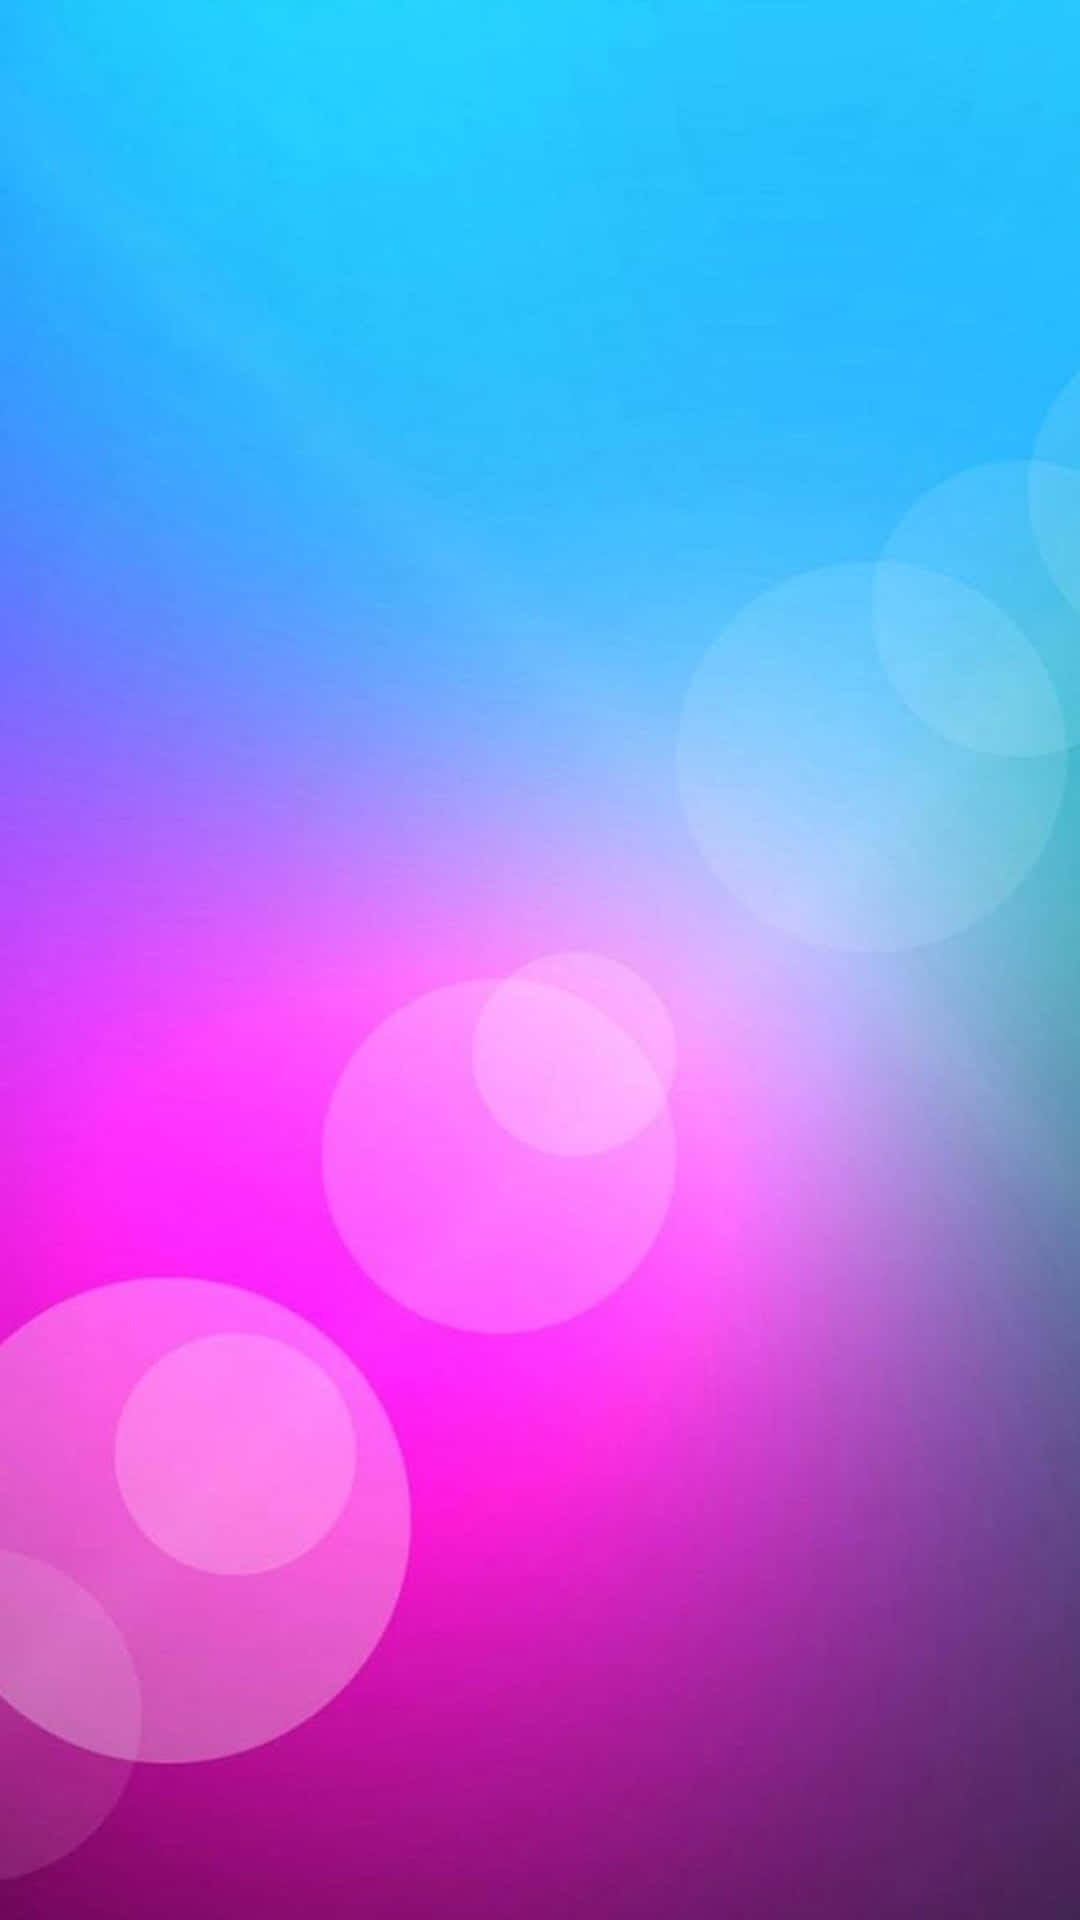 Lg G4 Pink And Blue Bokeh Effect Background